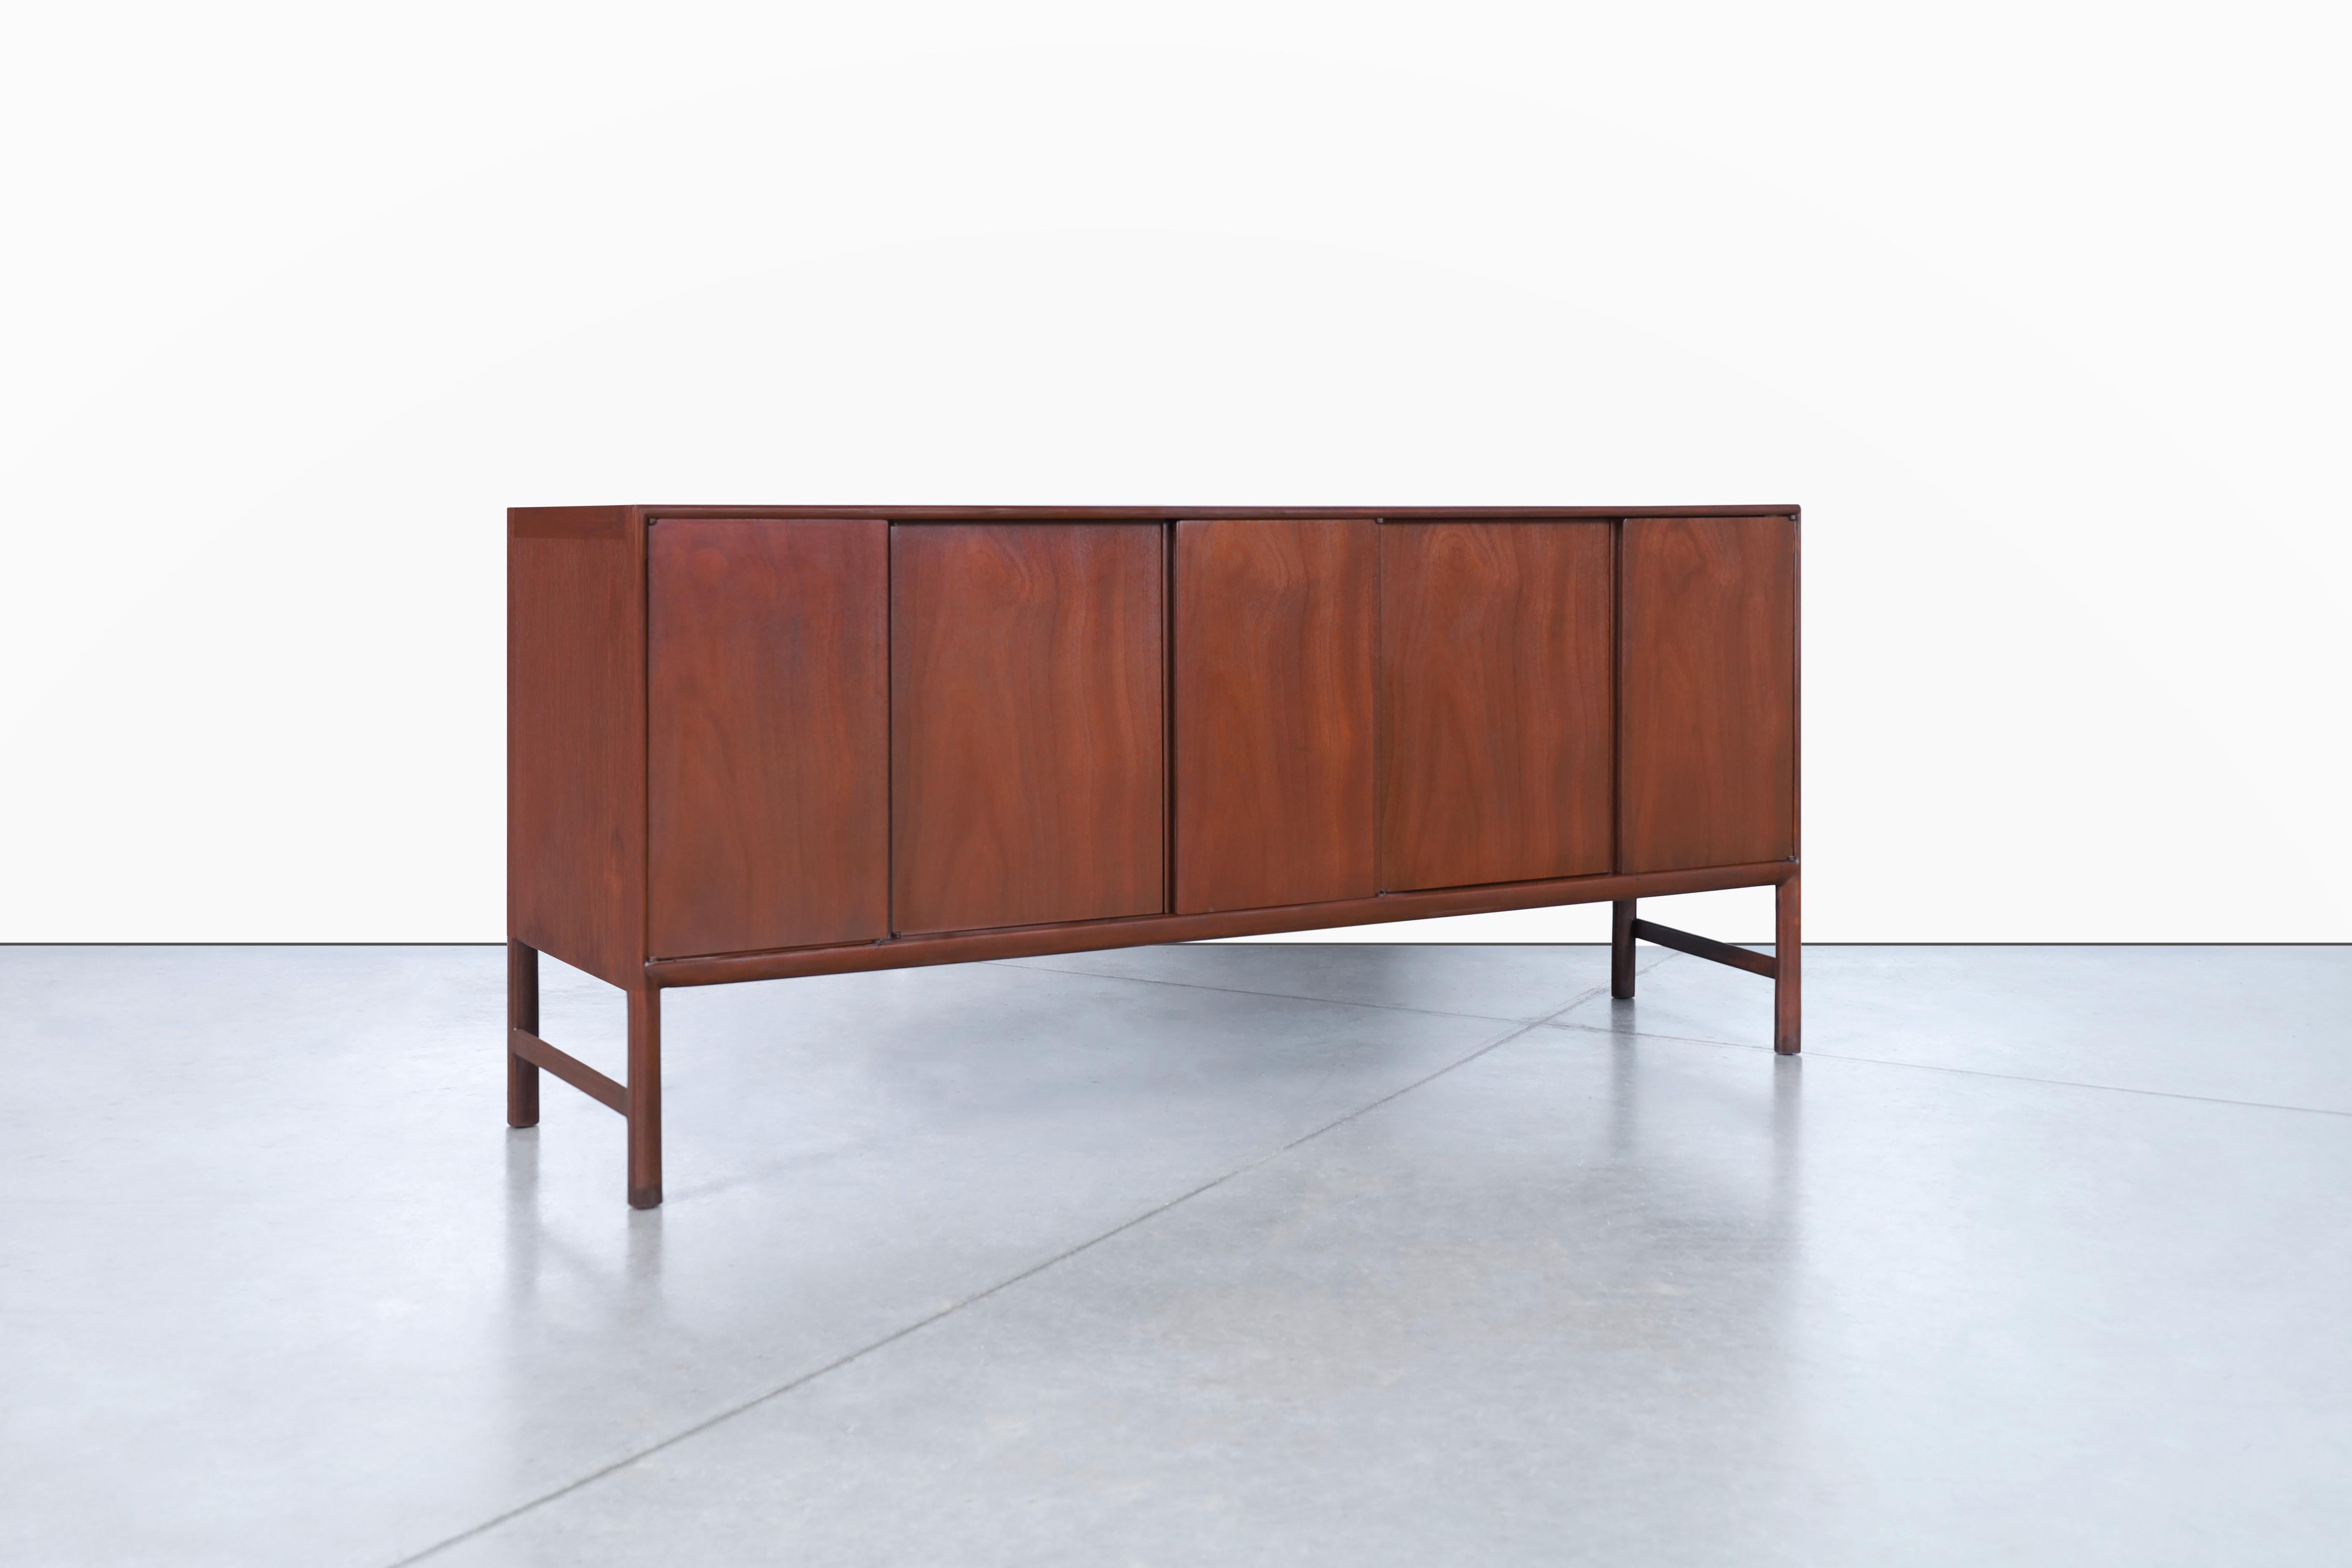 Mid-century walnut credenza designed by Raymond Sobota for Mount Airy in the United States, circa 1960s. Behold the epitome of mid-century modern design - a perfect balance of form and function. This stunning credenza is expertly crafted from rich